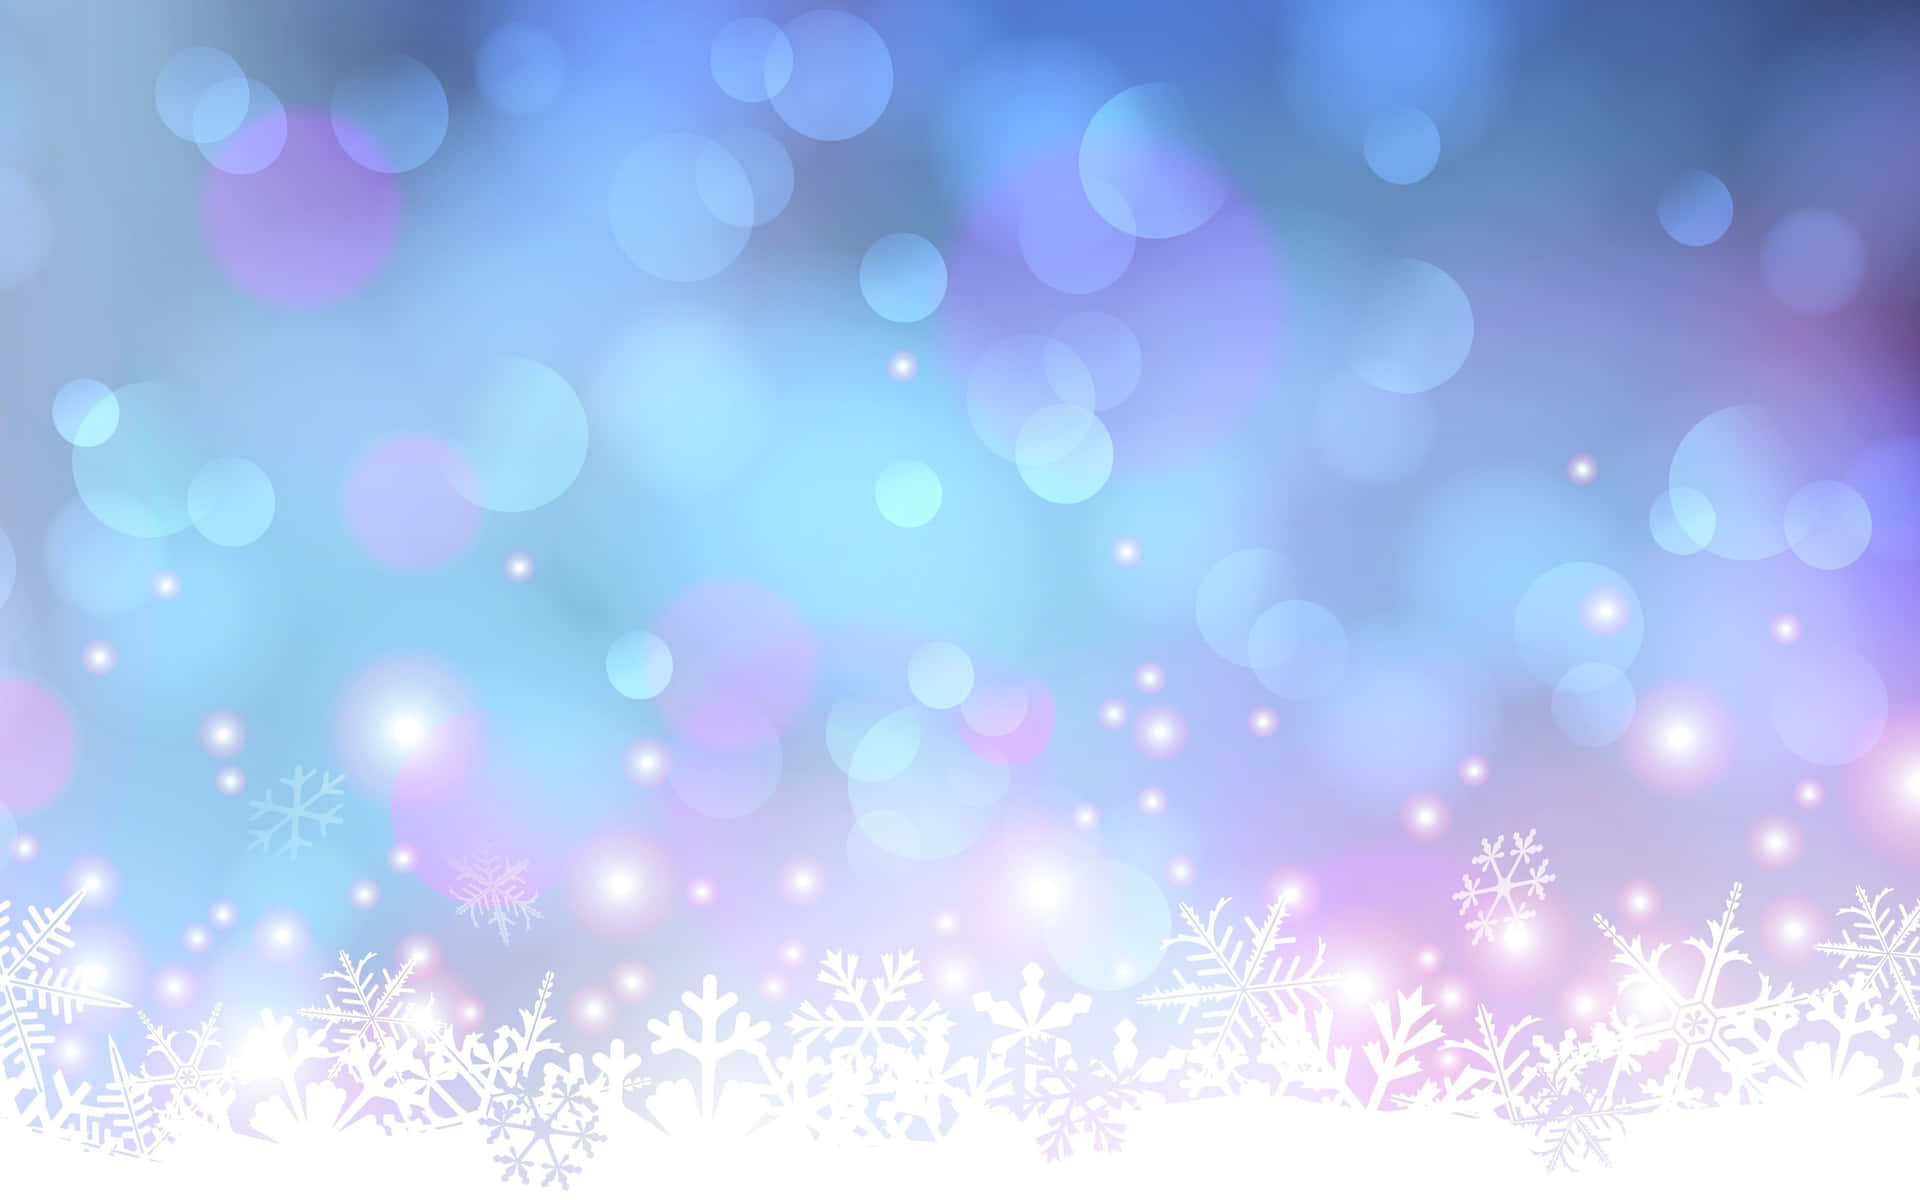 Take a deep breath and restore yourself in the beauty of this snowflake background